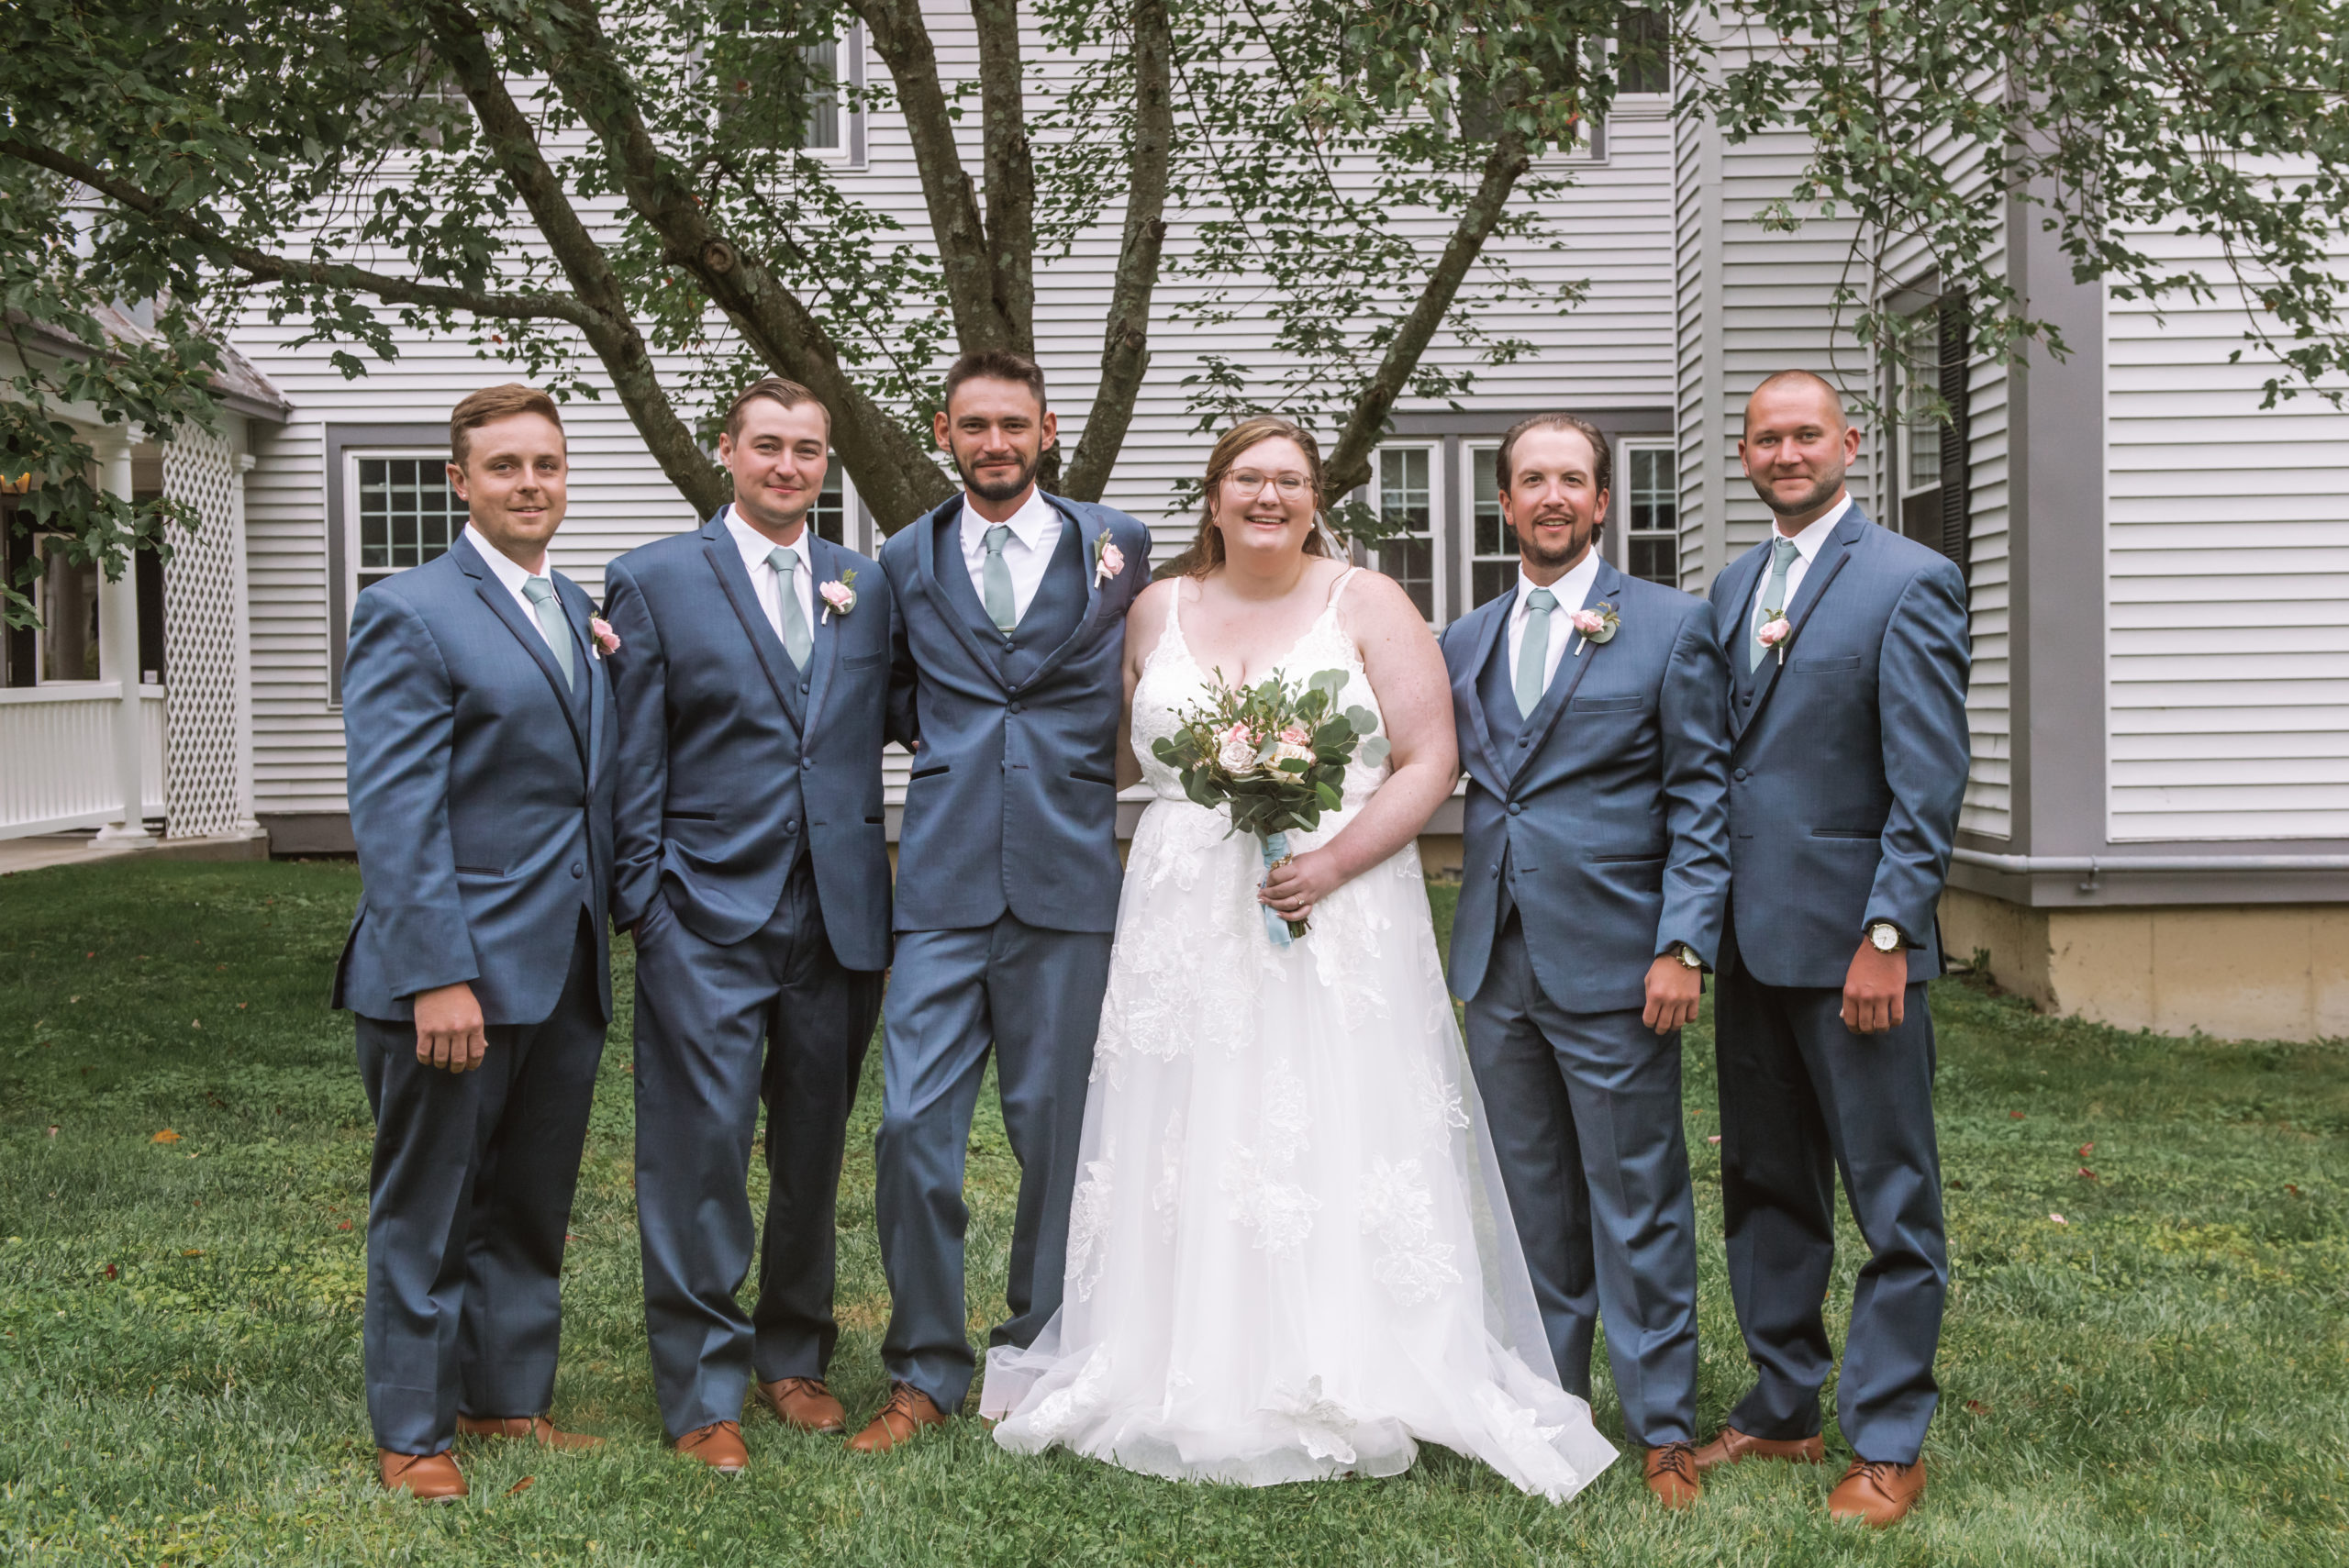 Bride standing in line with all of the groomsmen. She is wearing a long white lace gown with a long veil and is holding her bouquet in her left hand. The groomsmen are all wearing blue suits with light green ties and boutonnieres.